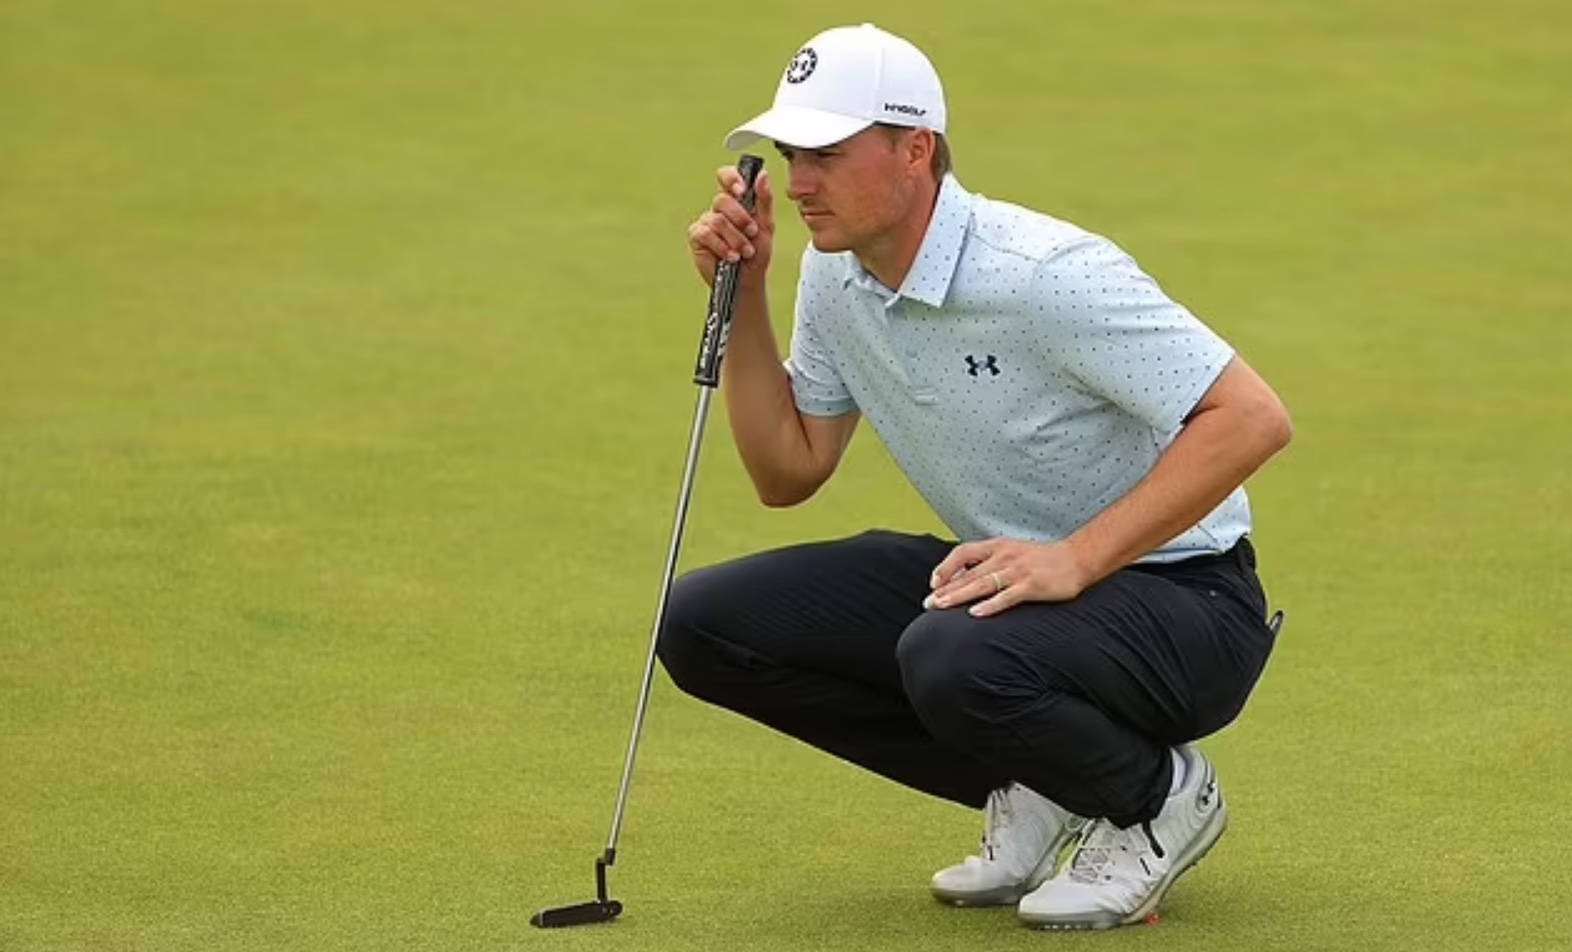 Spieth aims for Scottish Open victory